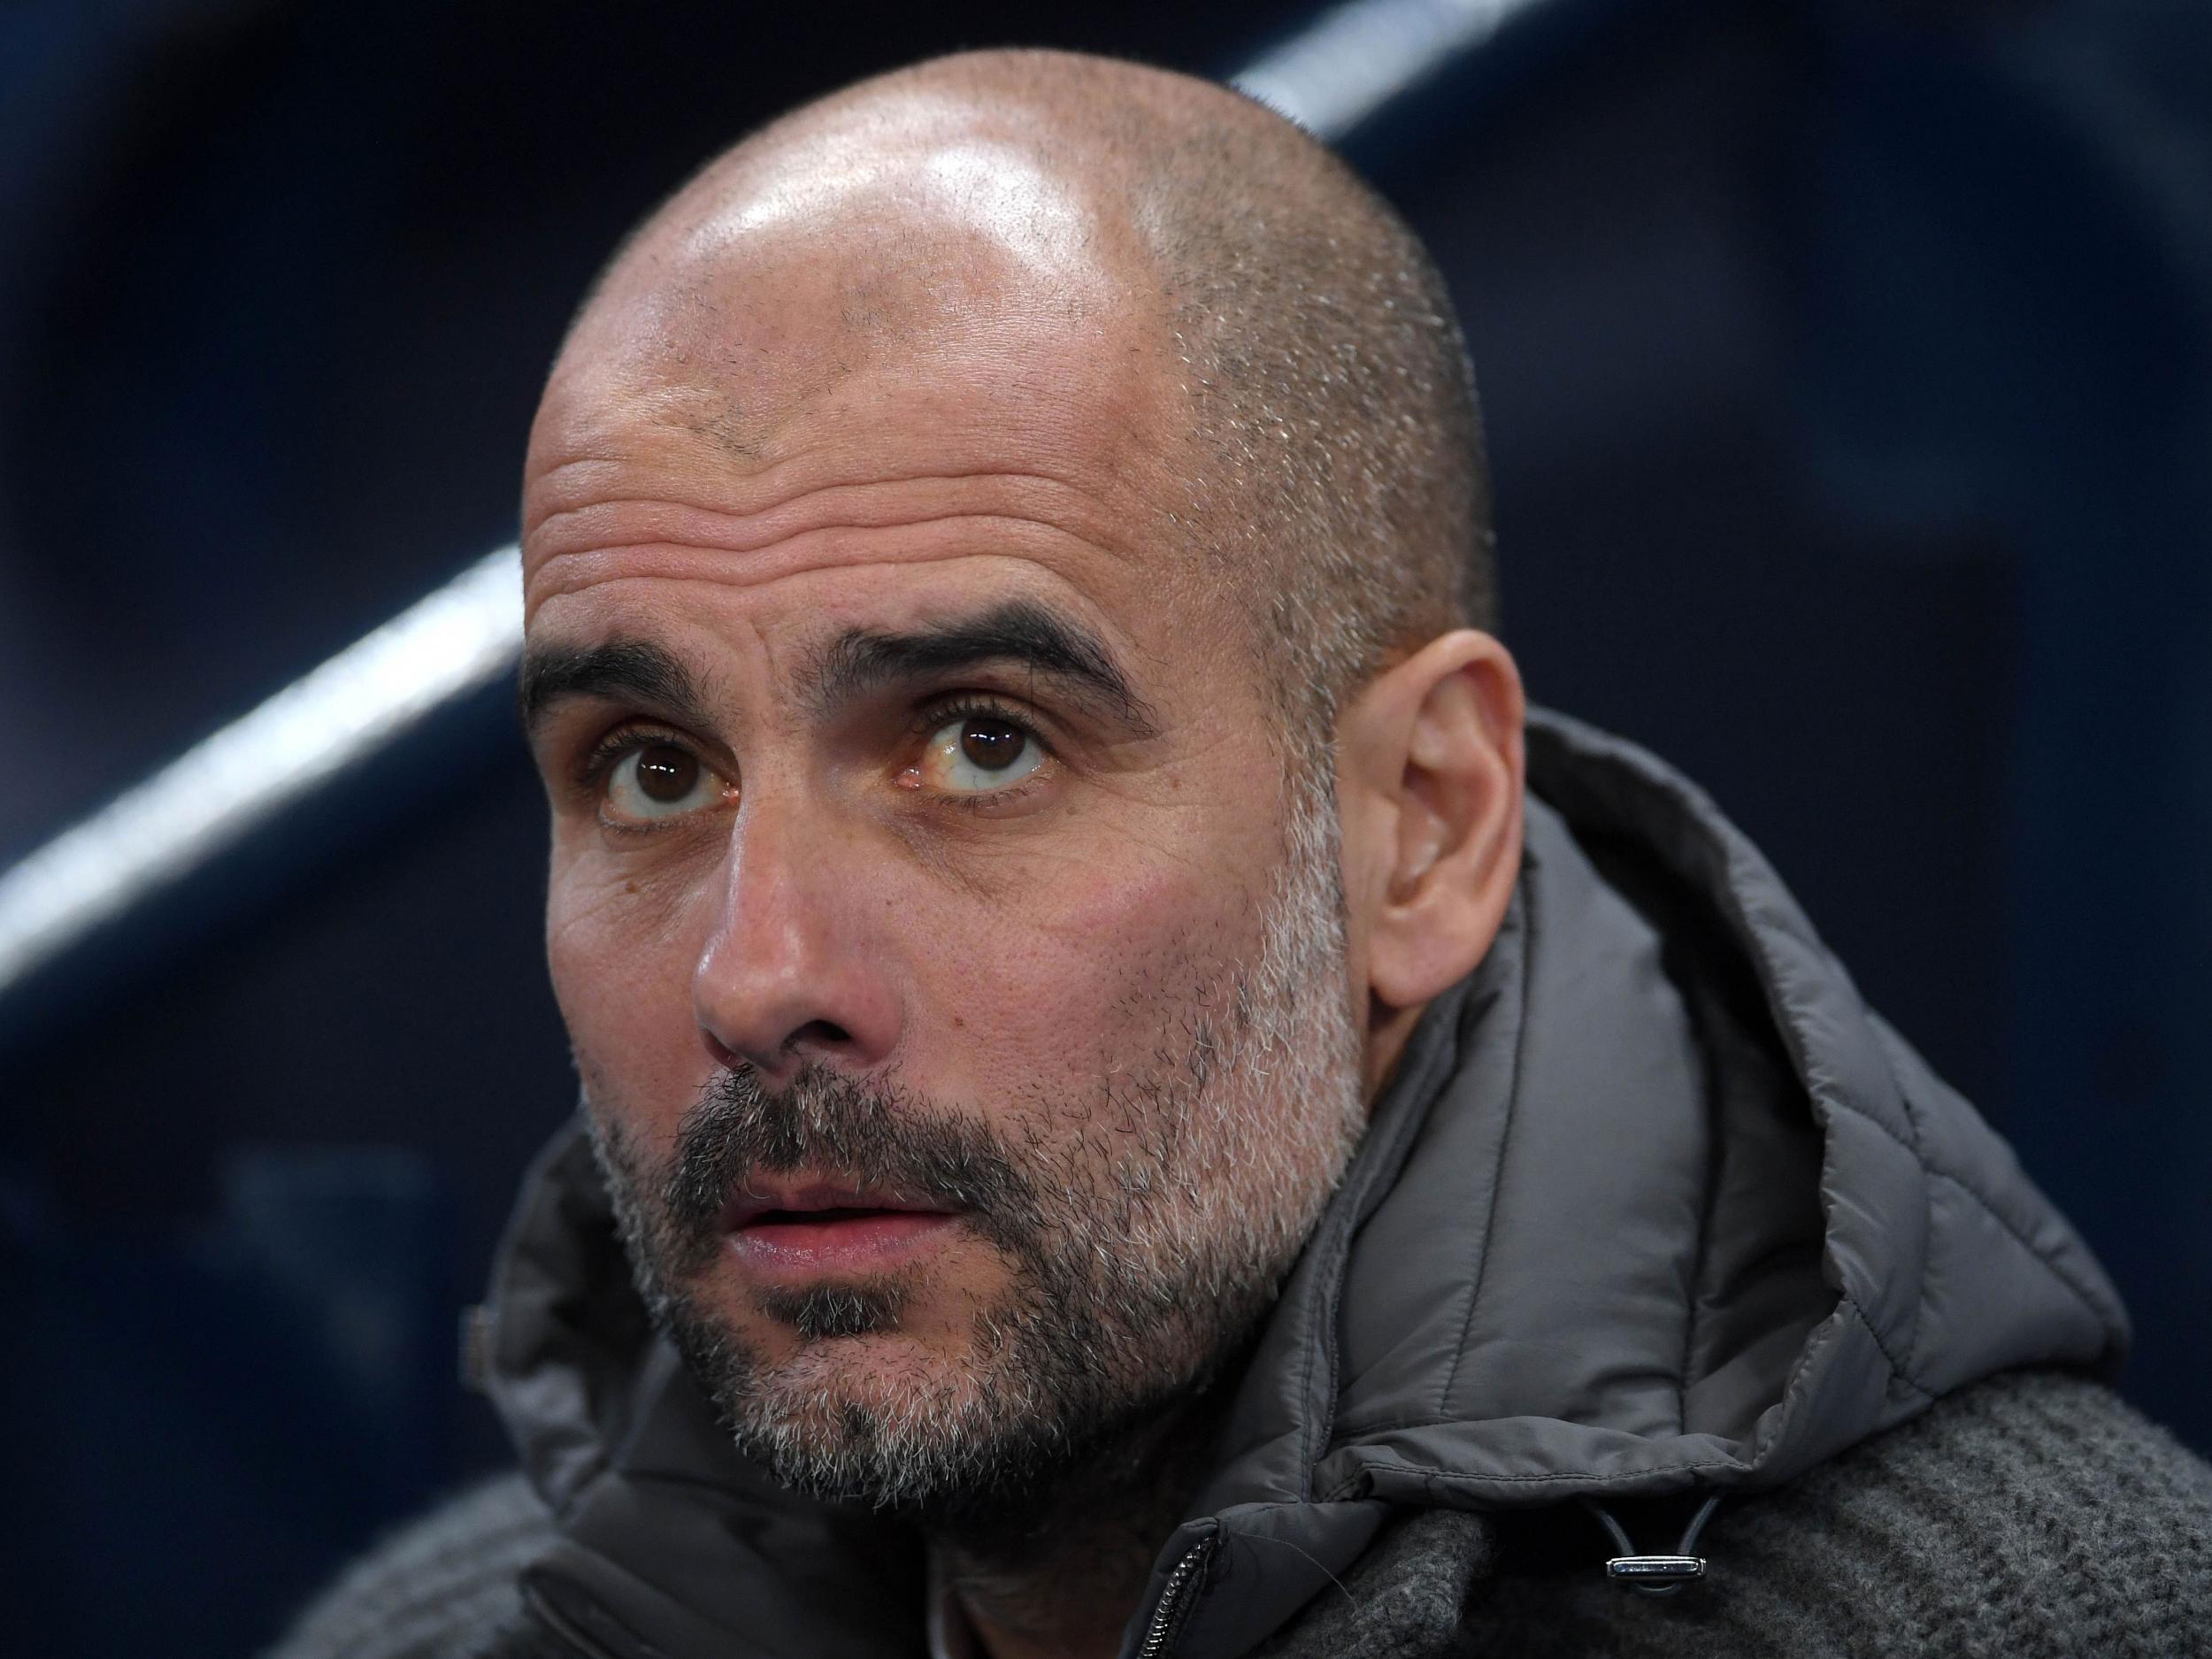 Pep Guardiola believes Manchester City can cope with a transfer ban